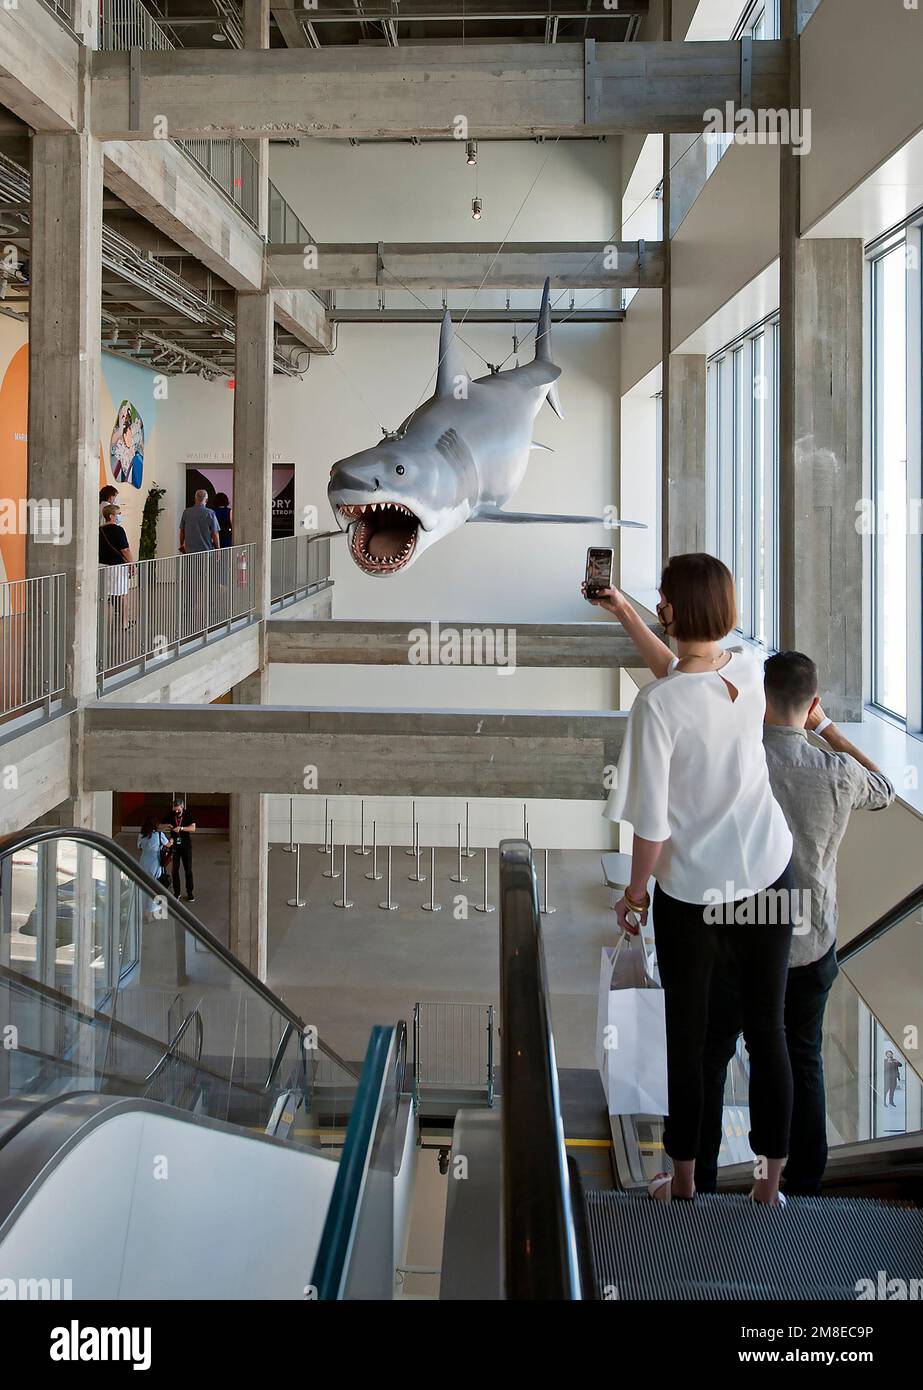 A visitor snaps a cell phone photo of the Shark model form Jaws on display at the Academy Museum of Motion Pictures in Los Angeles, California, USA Stock Photo